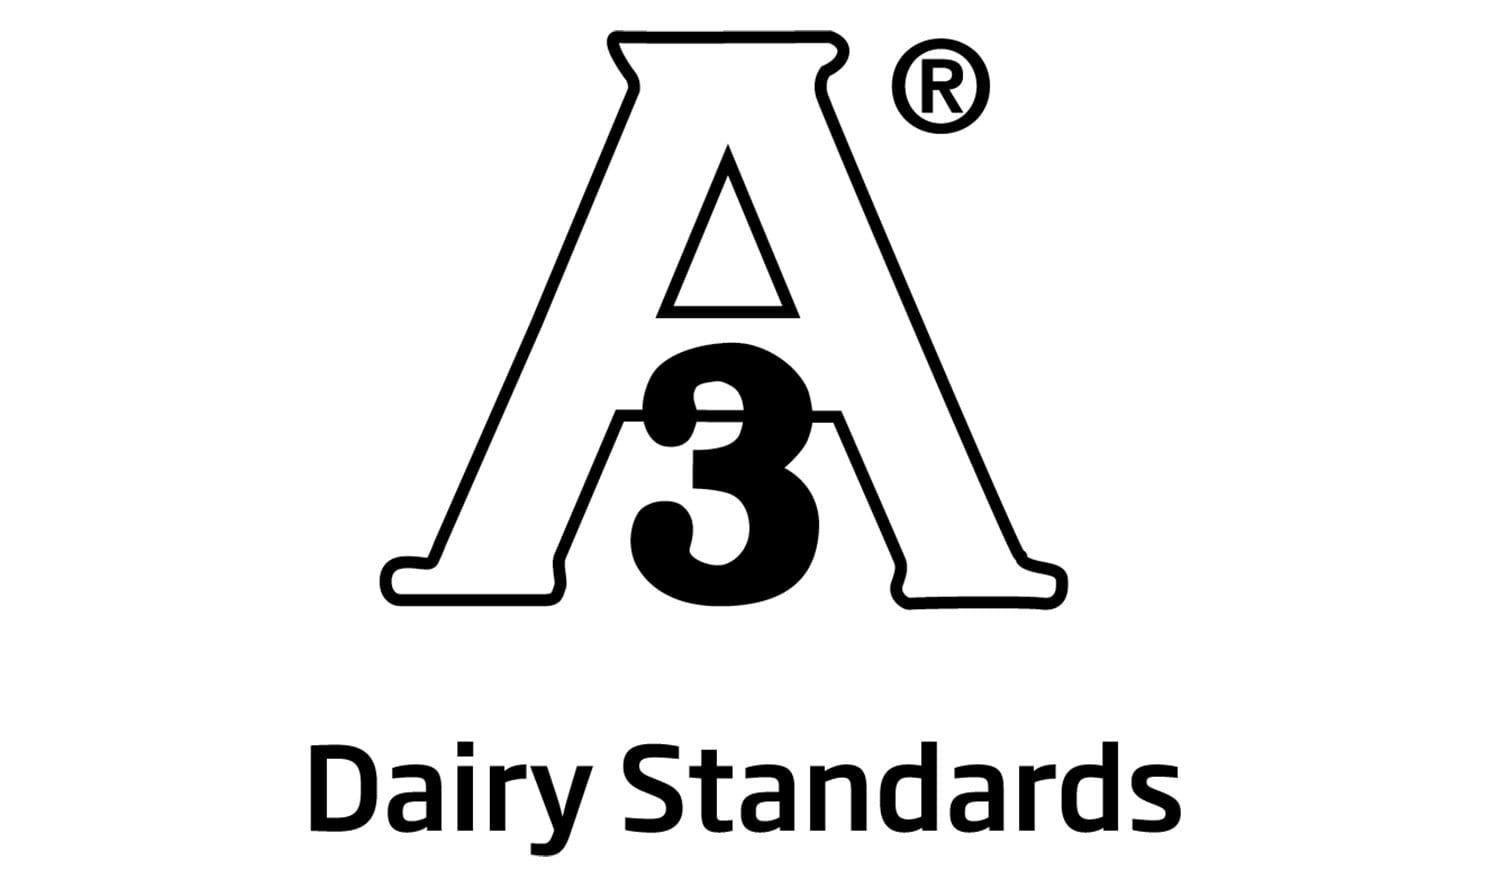 3A Dairy Standards